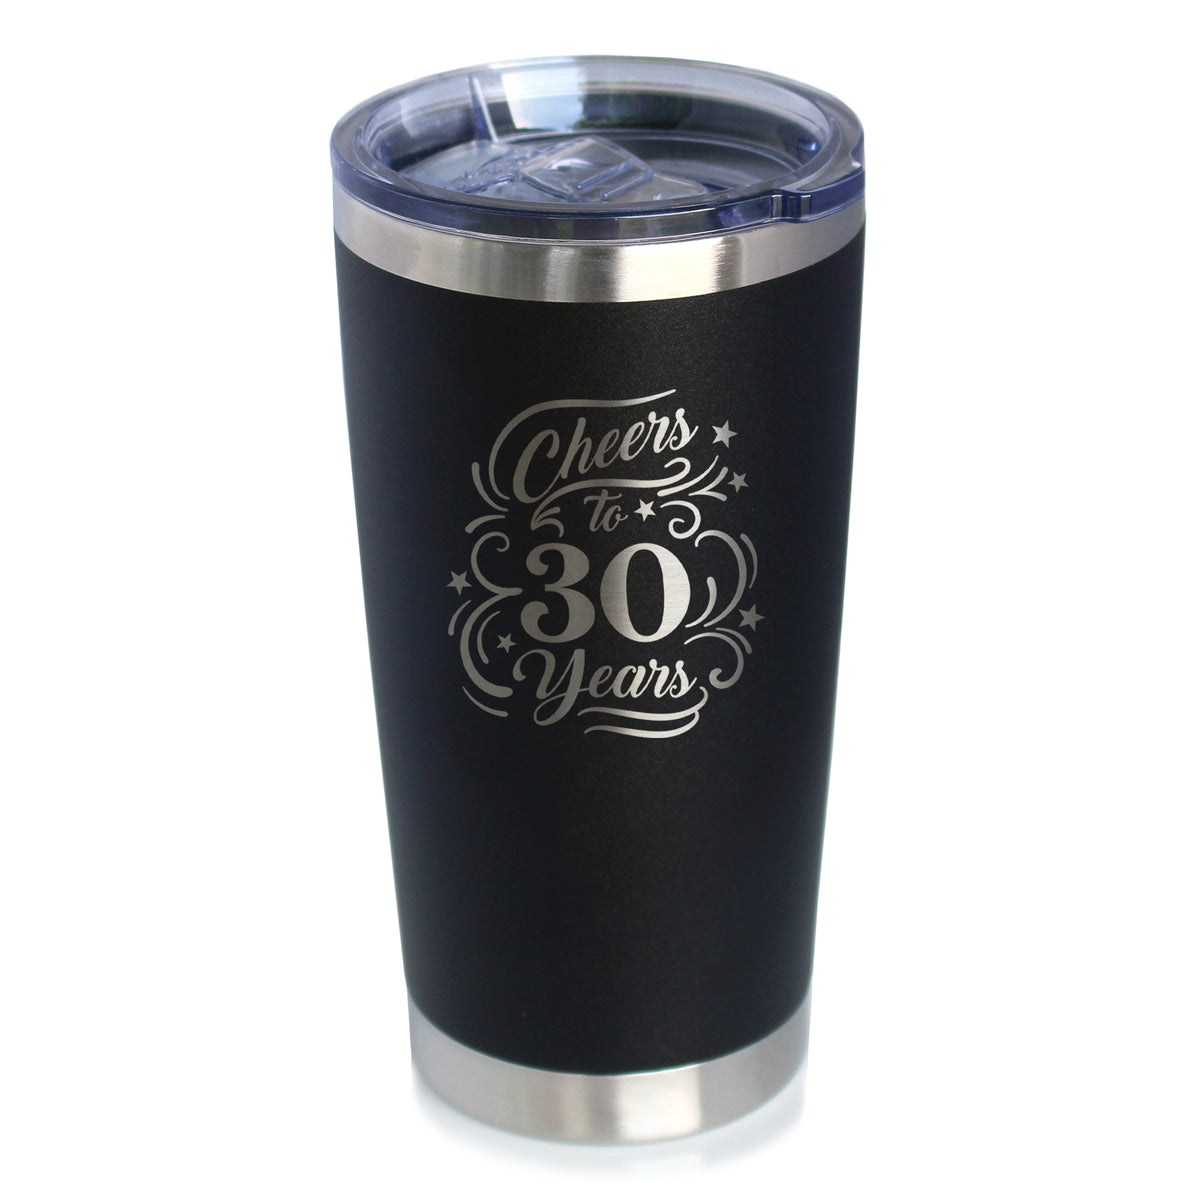 Cheers to 30 Years - Insulated Coffee Tumbler Cup with Sliding Lid - Stainless Steel Insulated Mug - 30th Anniversary Gifts and Party Decor